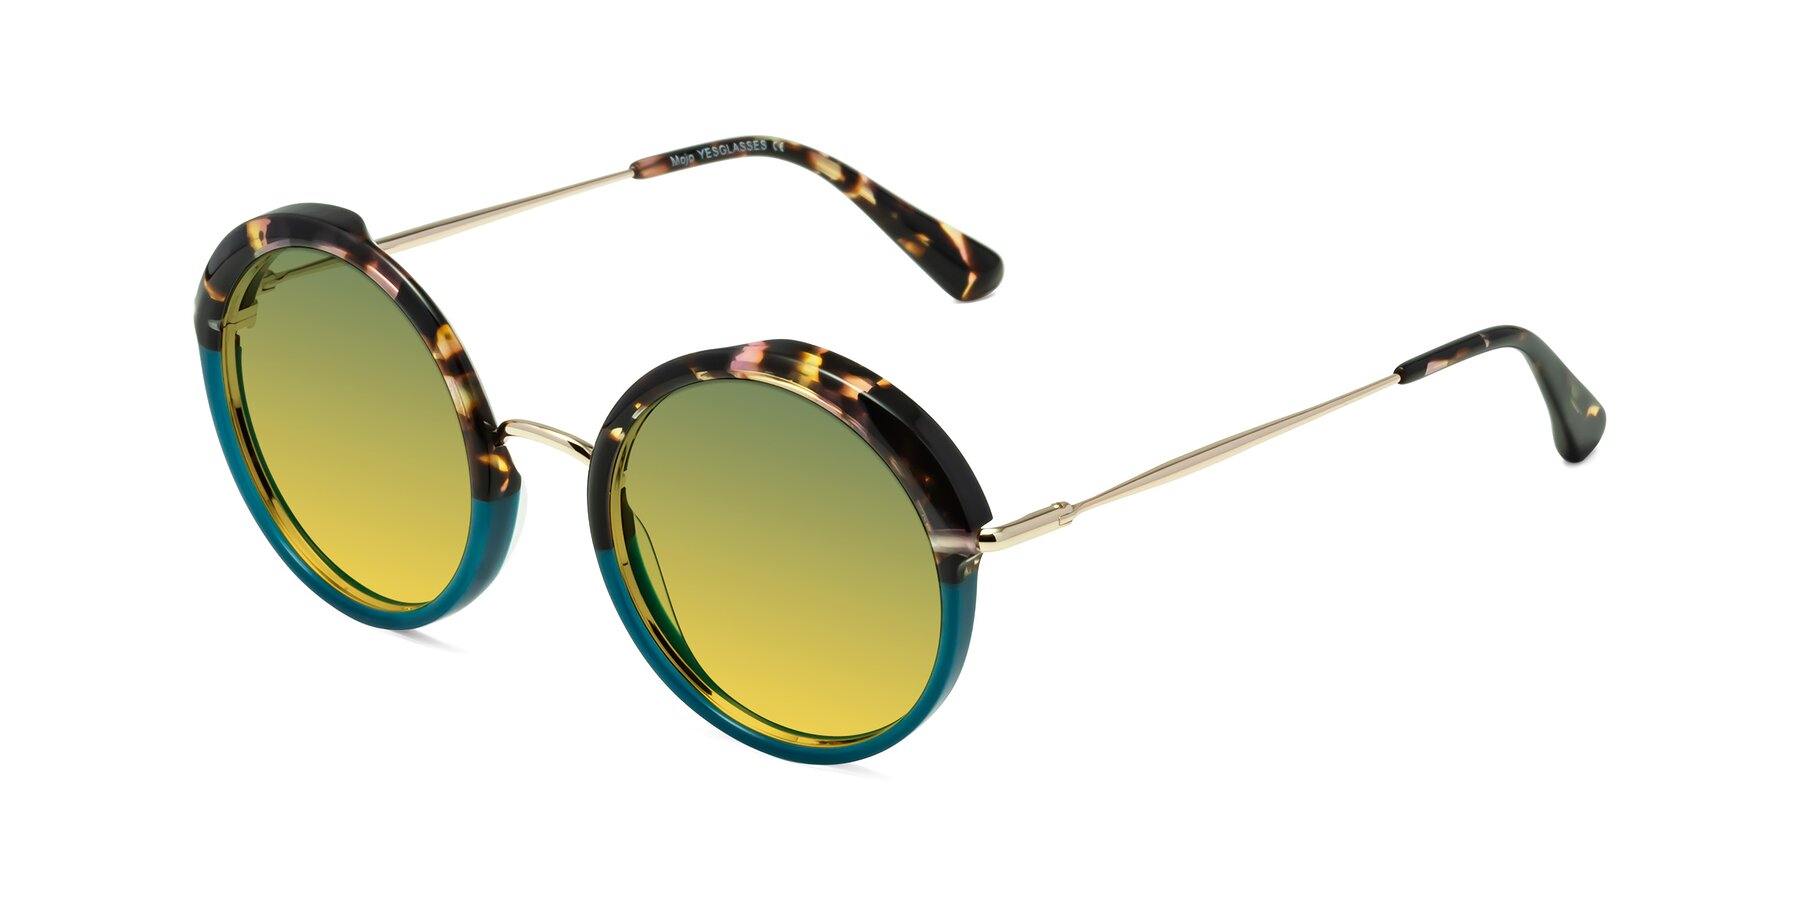 Angle of Mojo in Floral-Teal with Green / Yellow Gradient Lenses